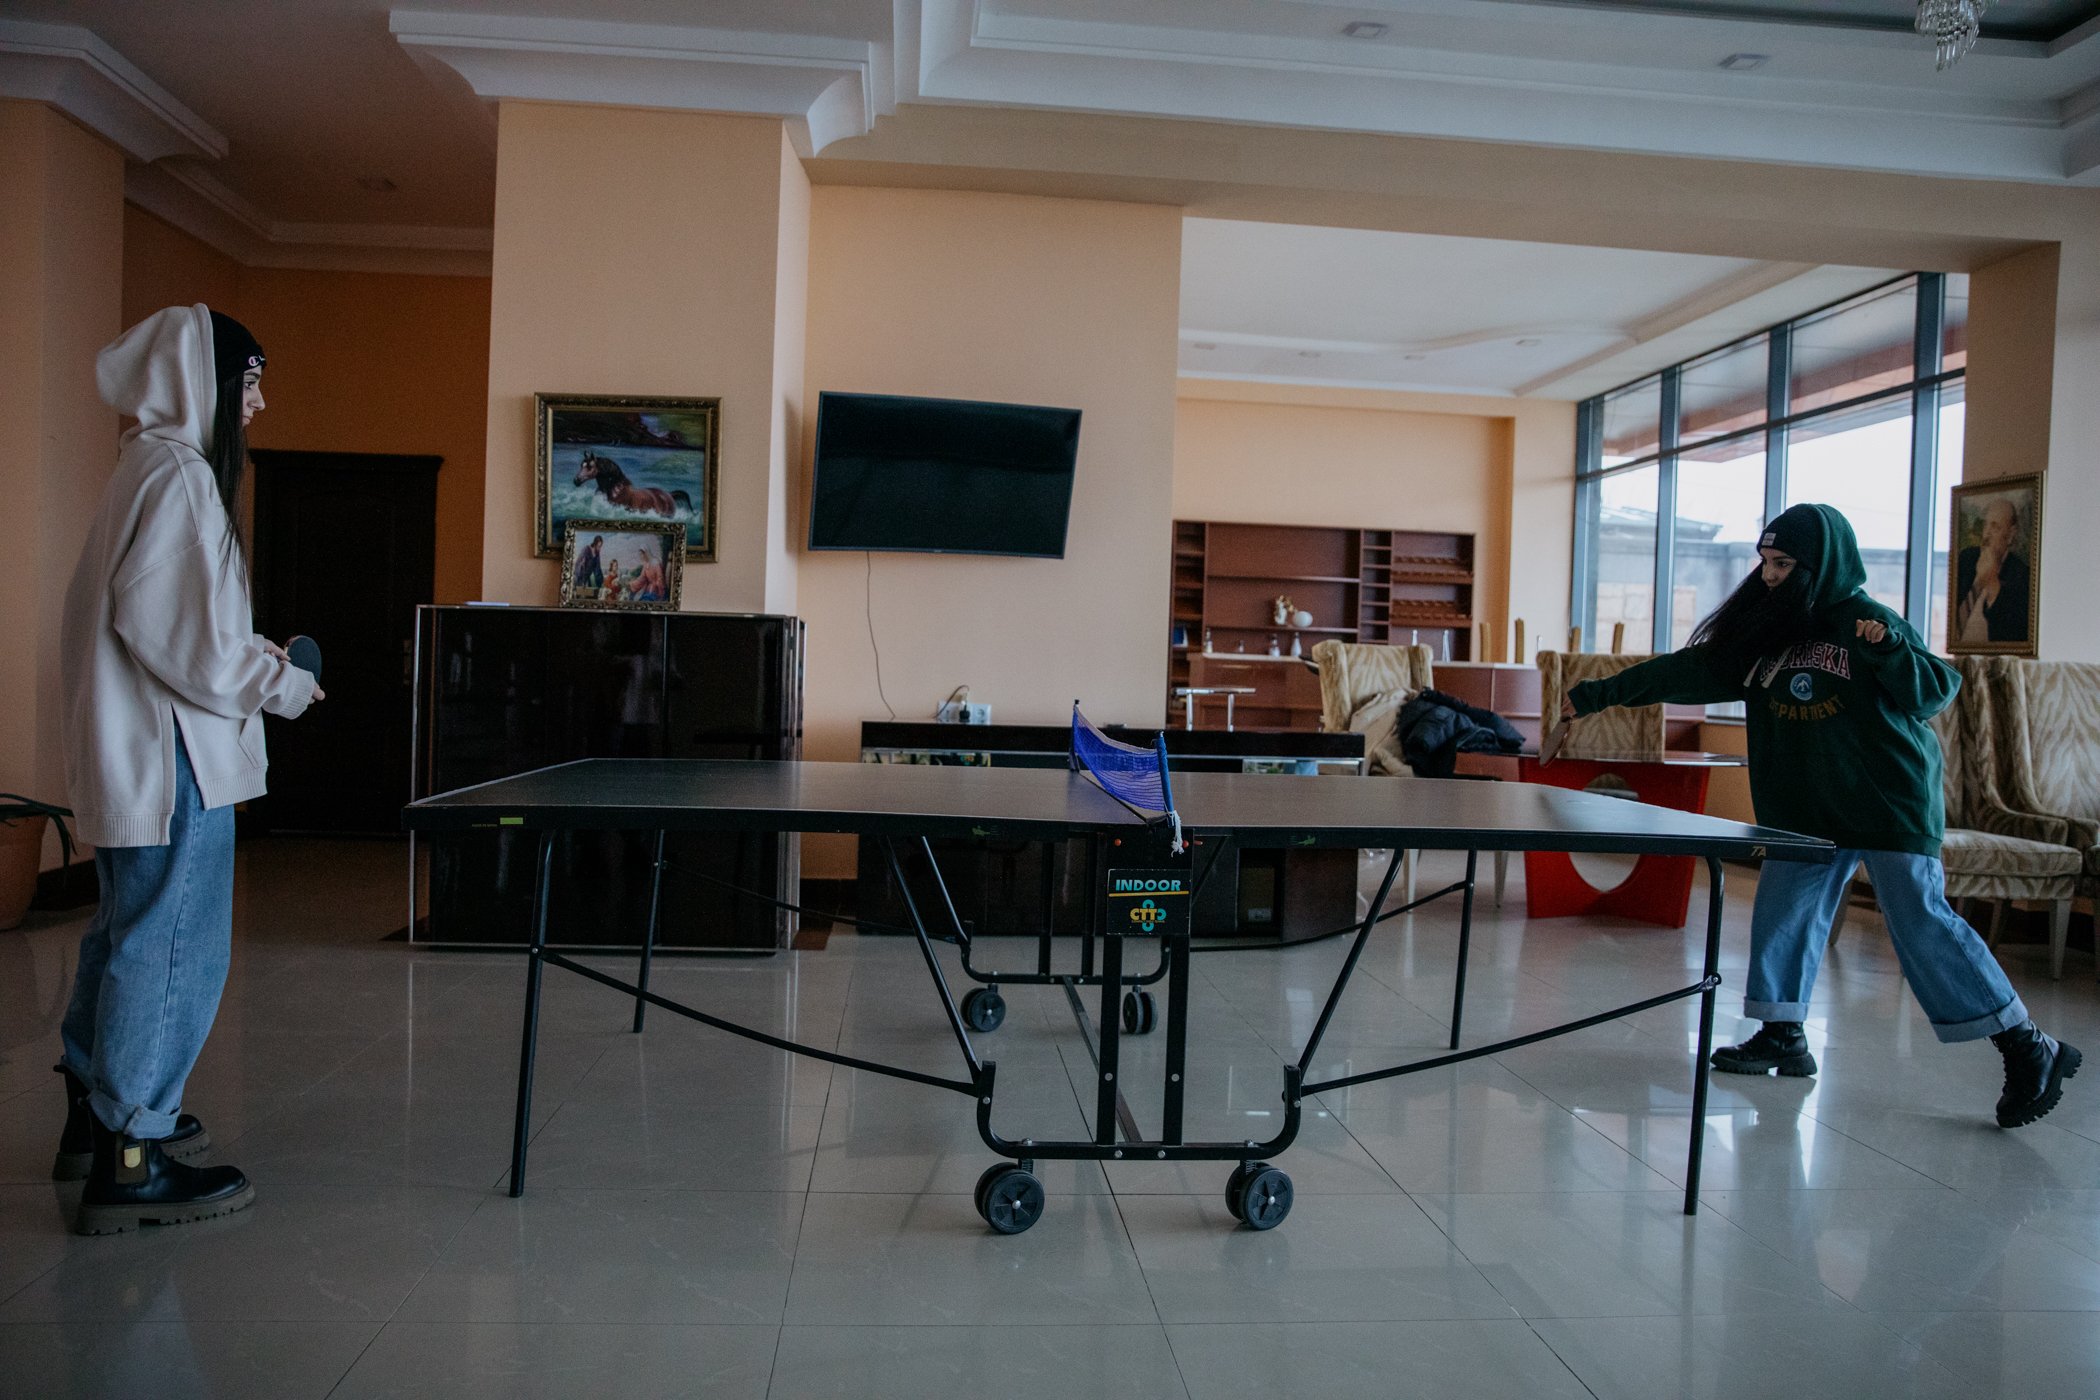  Two members of the Asparez dance group play table tennis in the Hotel Goris. 